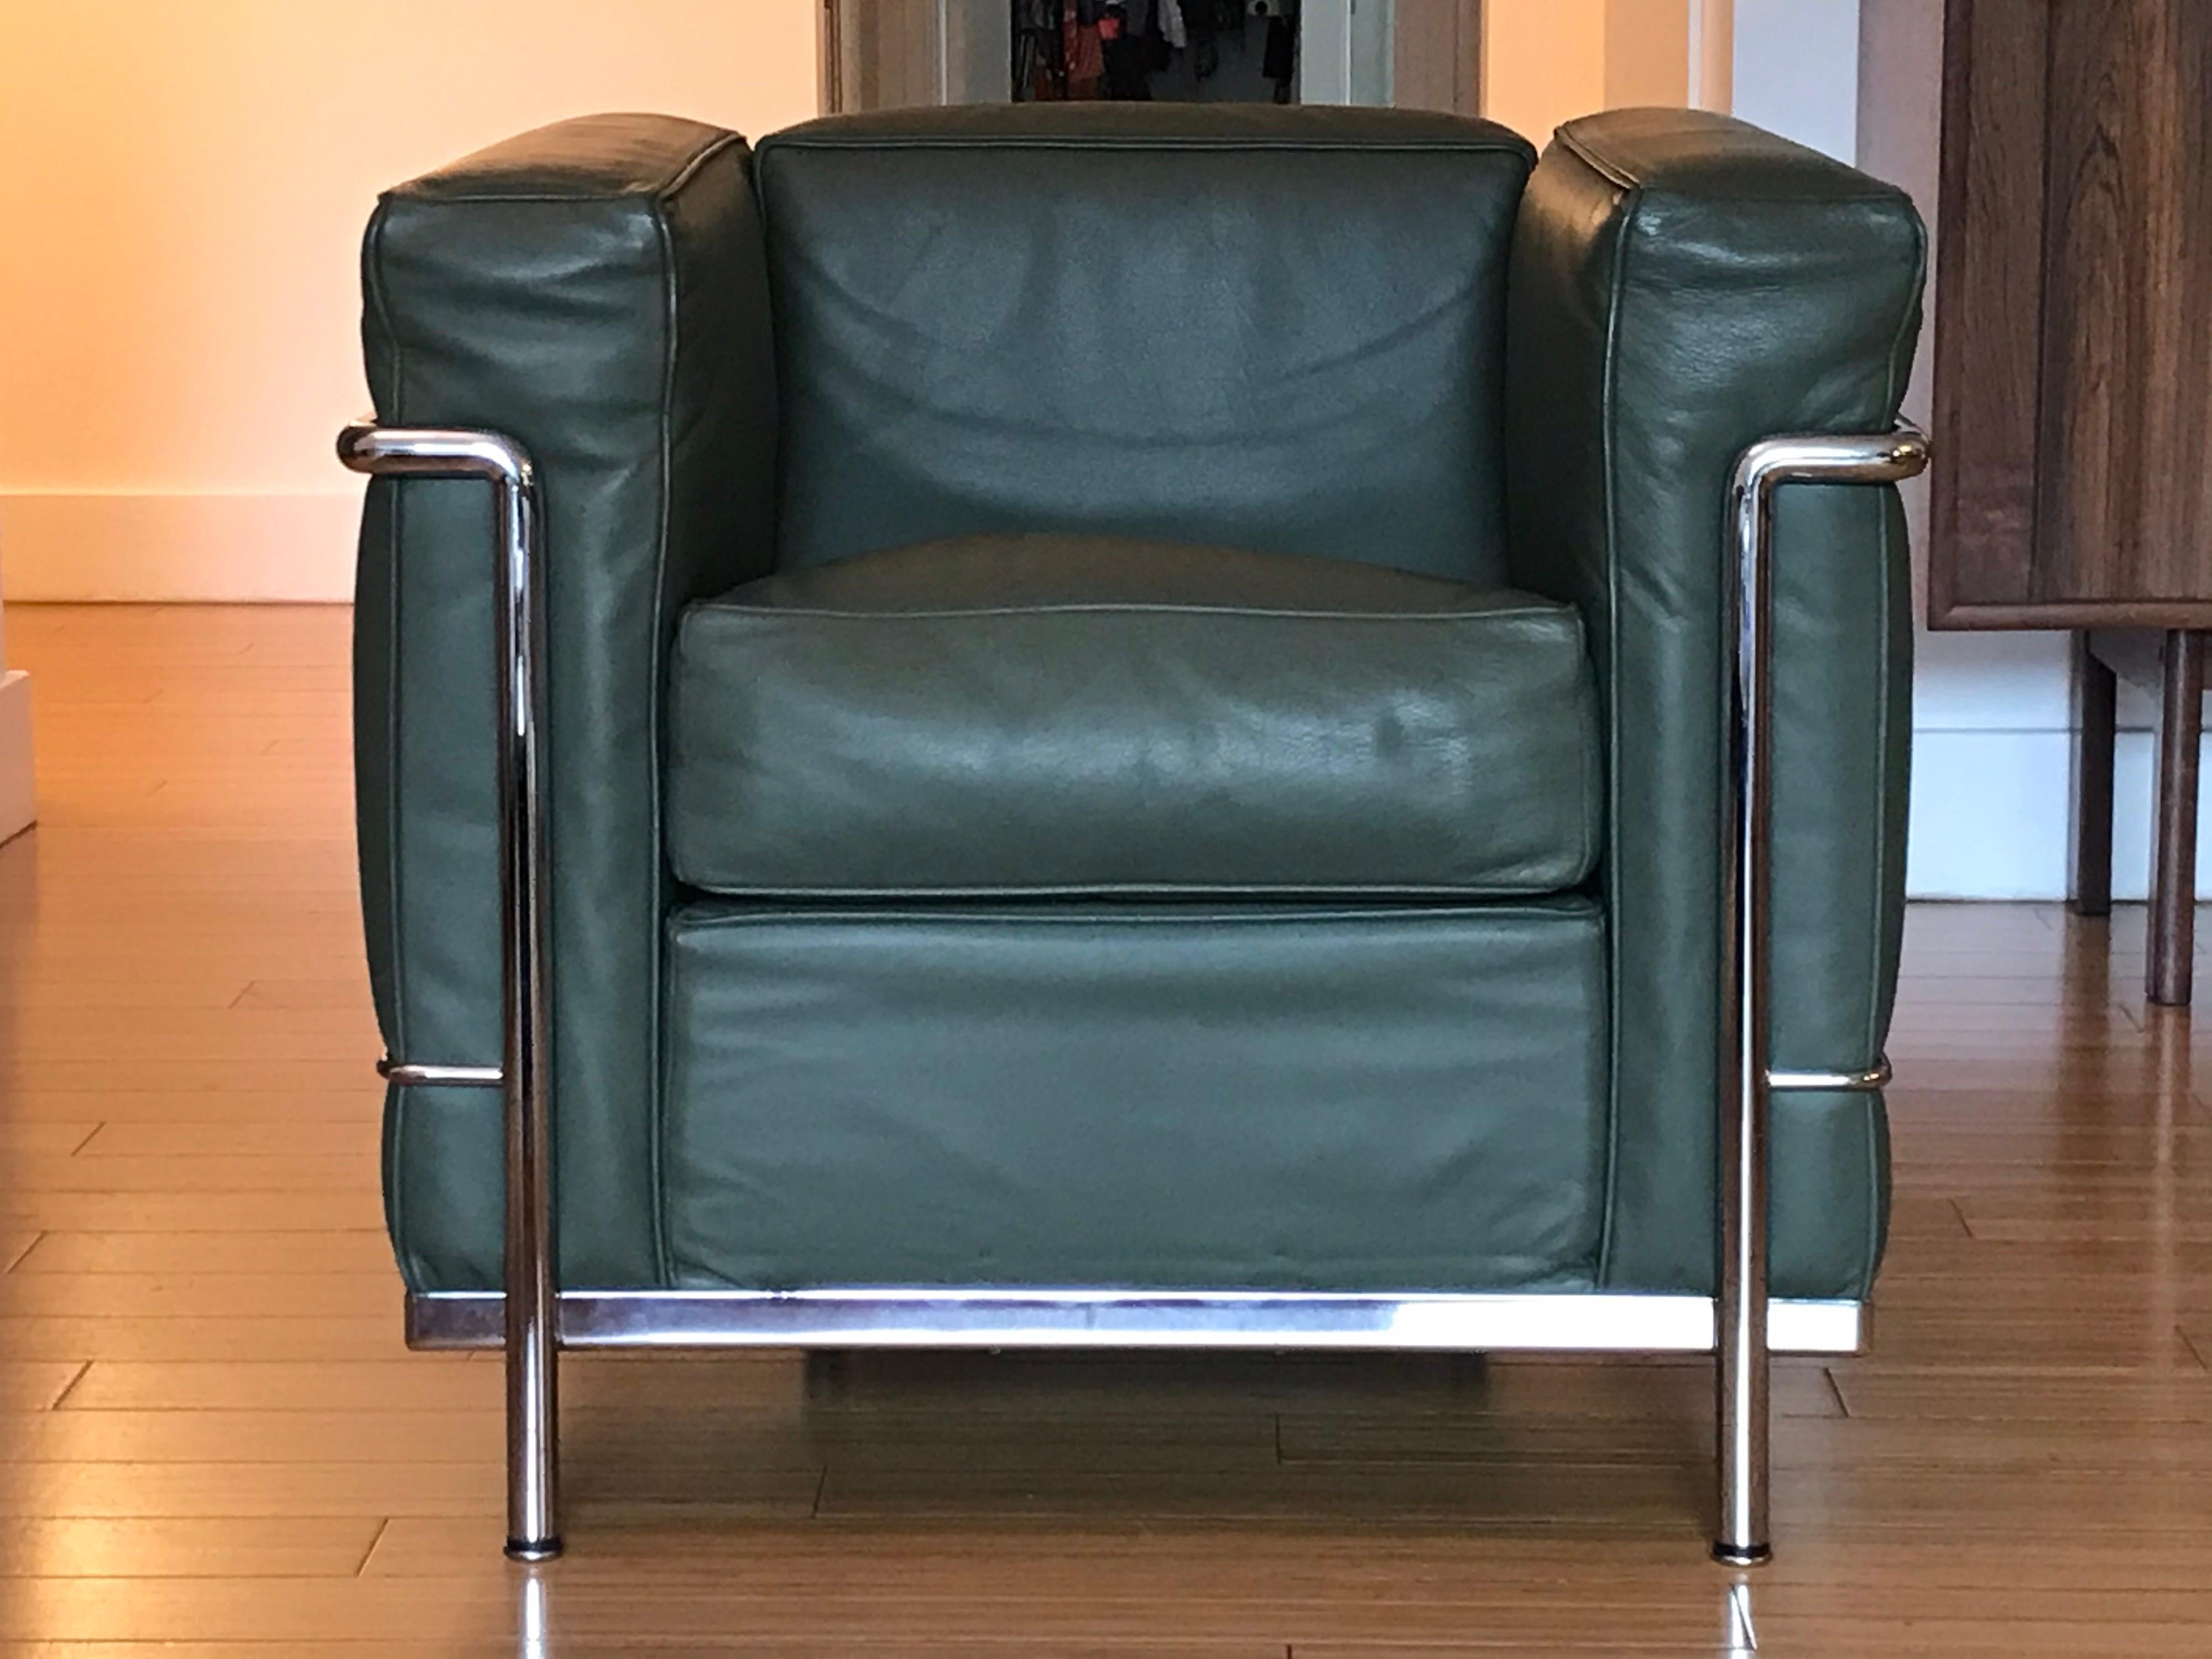 A Classic modernist design.
This chair came from one owner who had ordered this handsome forest green leather upholstery.
A quality made piece signed Cassina on the upholstery with hallmarks on the steel.